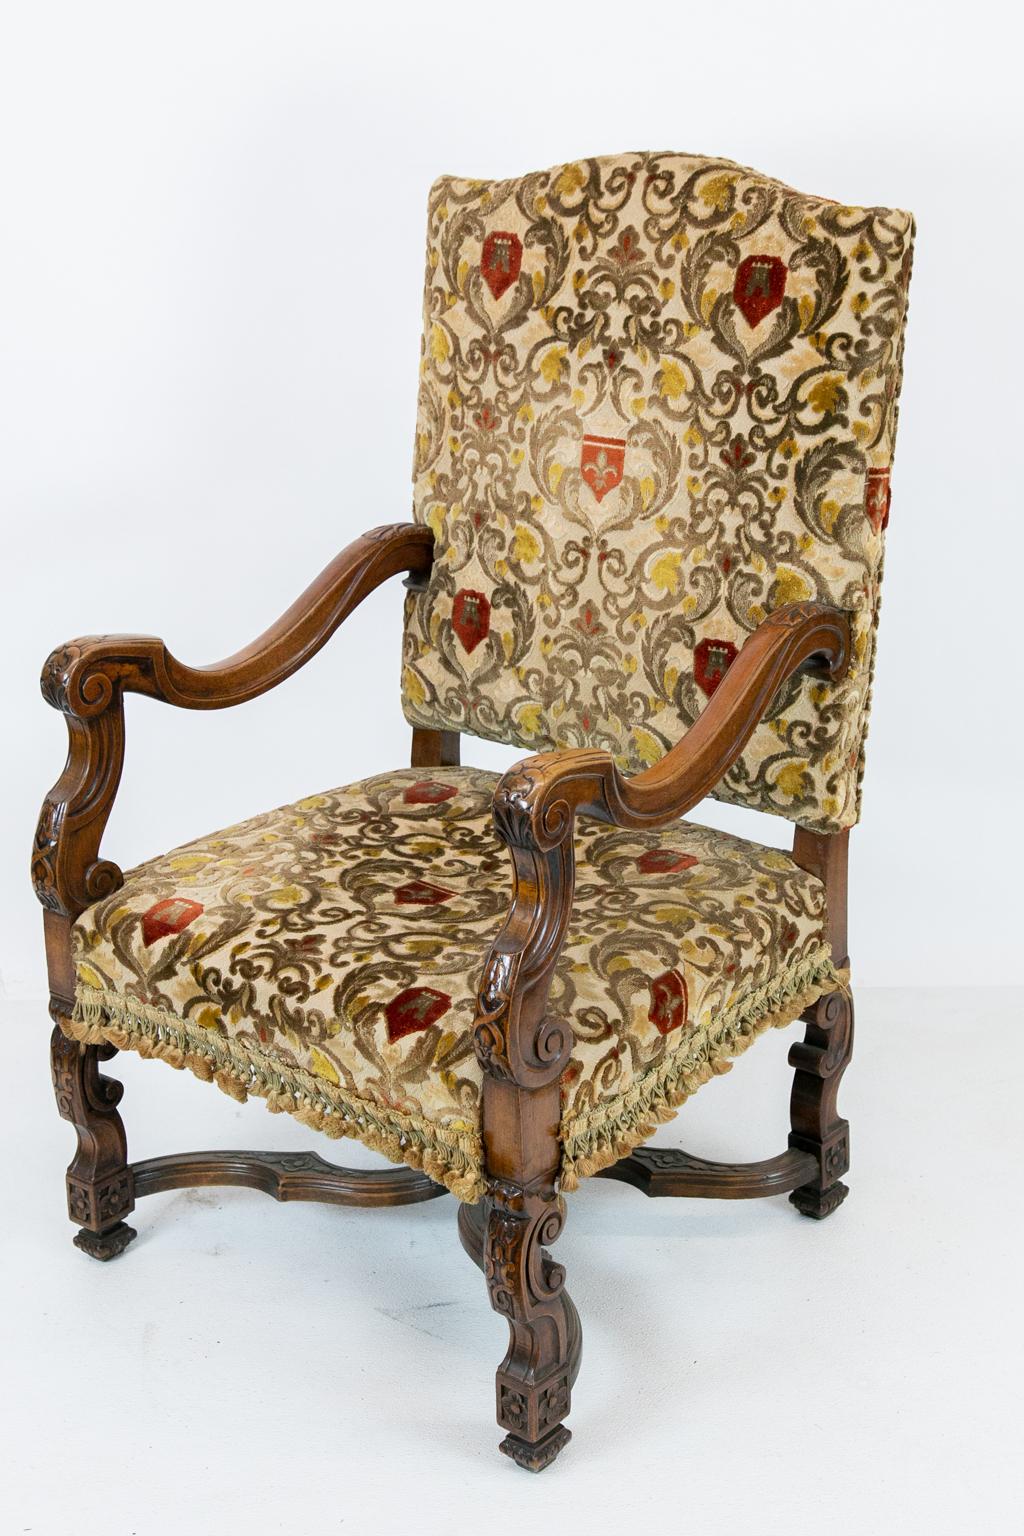 Upholstery Mahogany English Carved Walnut Upholstered Crewel Work Armchair For Sale